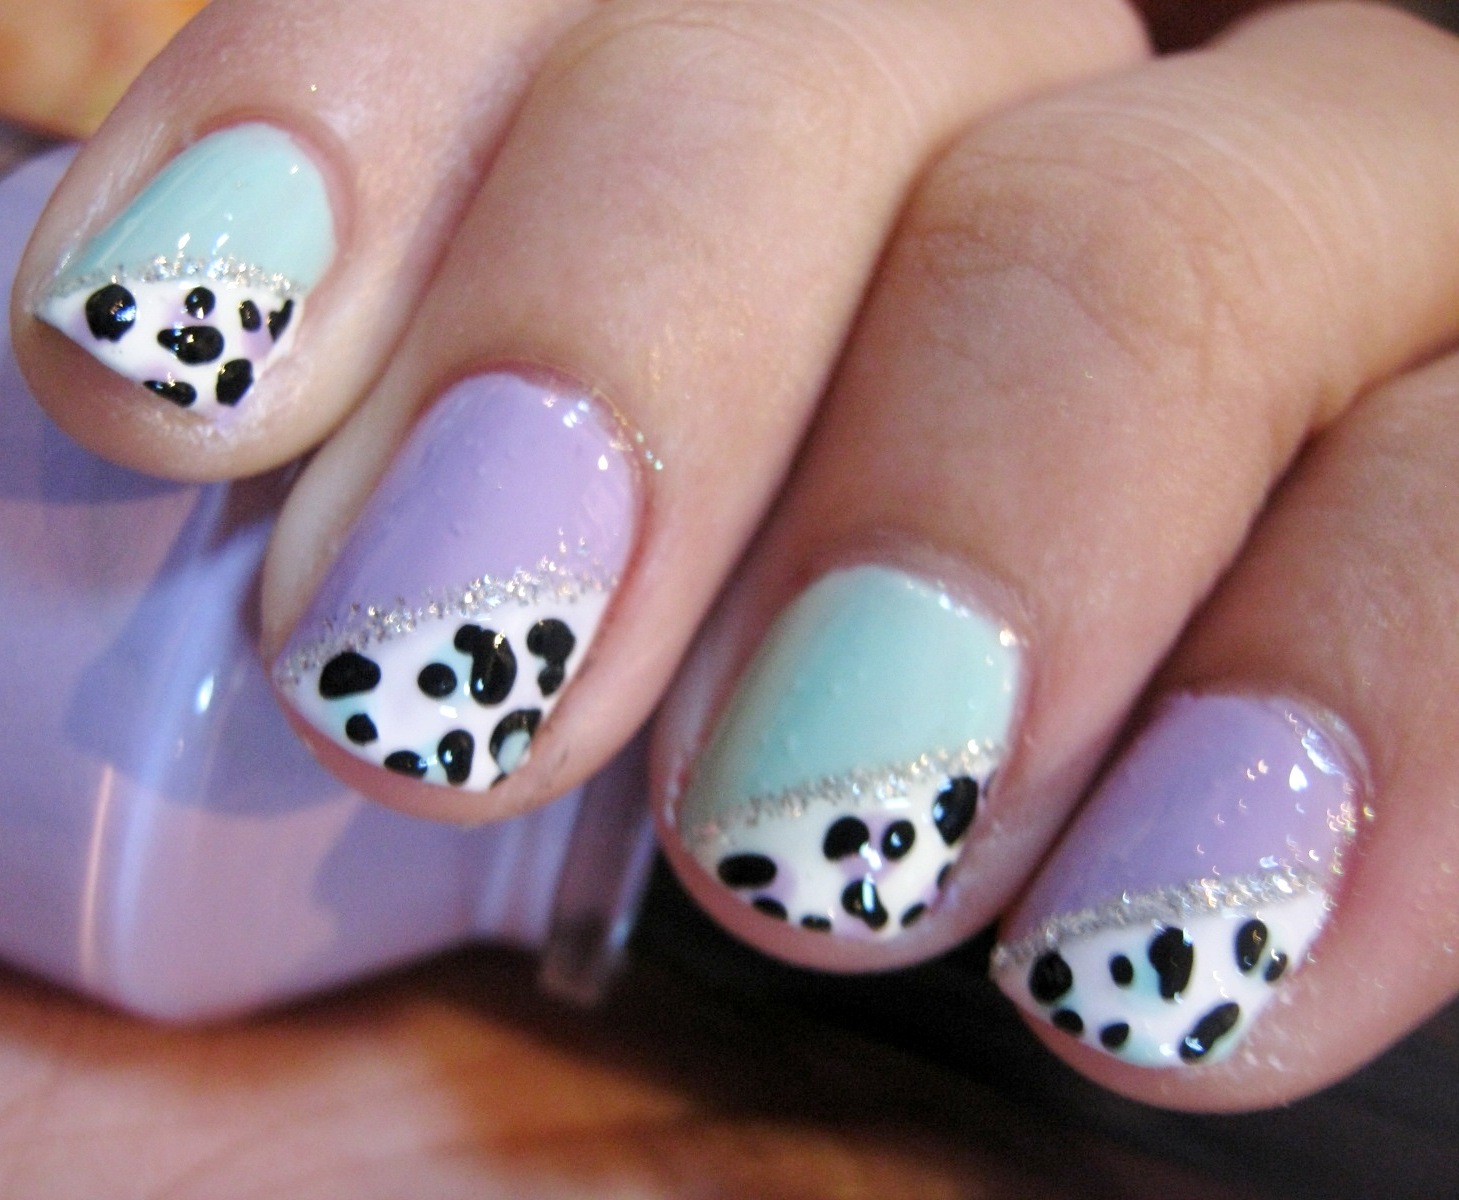 9. Step by Step Guide to Creating Cute Animal Nail Designs - wide 7